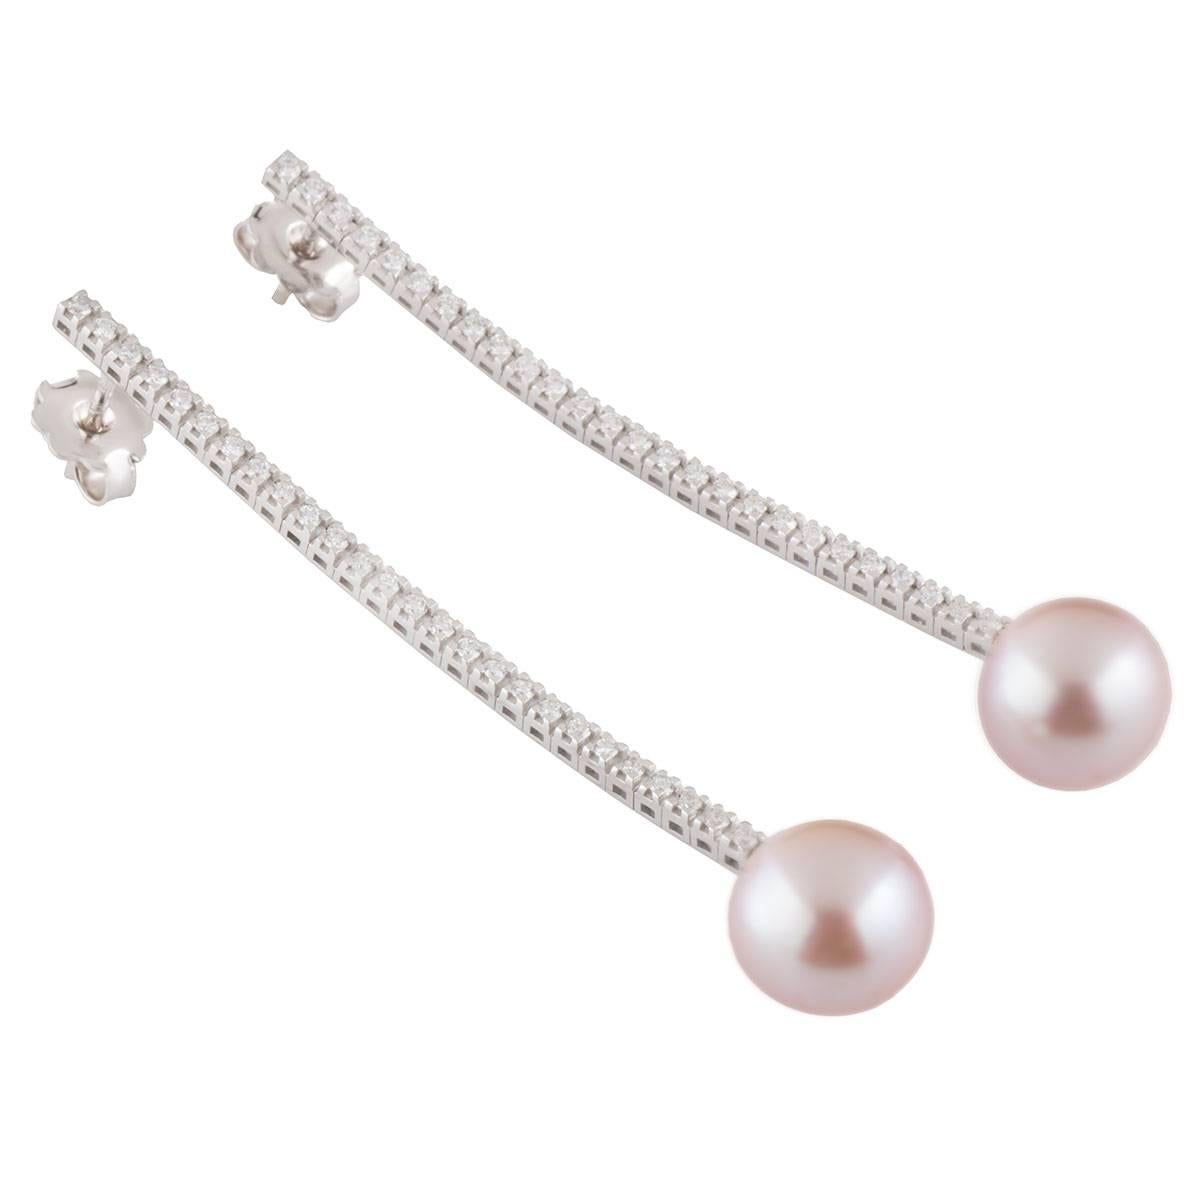 A beautiful 18k white gold diamond and pearl earrings. The earrings comprises of a line of round brilliant cut diamonds in 4 claw setting finished off with a pink pearl at the end. The diamonds have a total weight of 0.68ct, G colour and VS clarity.